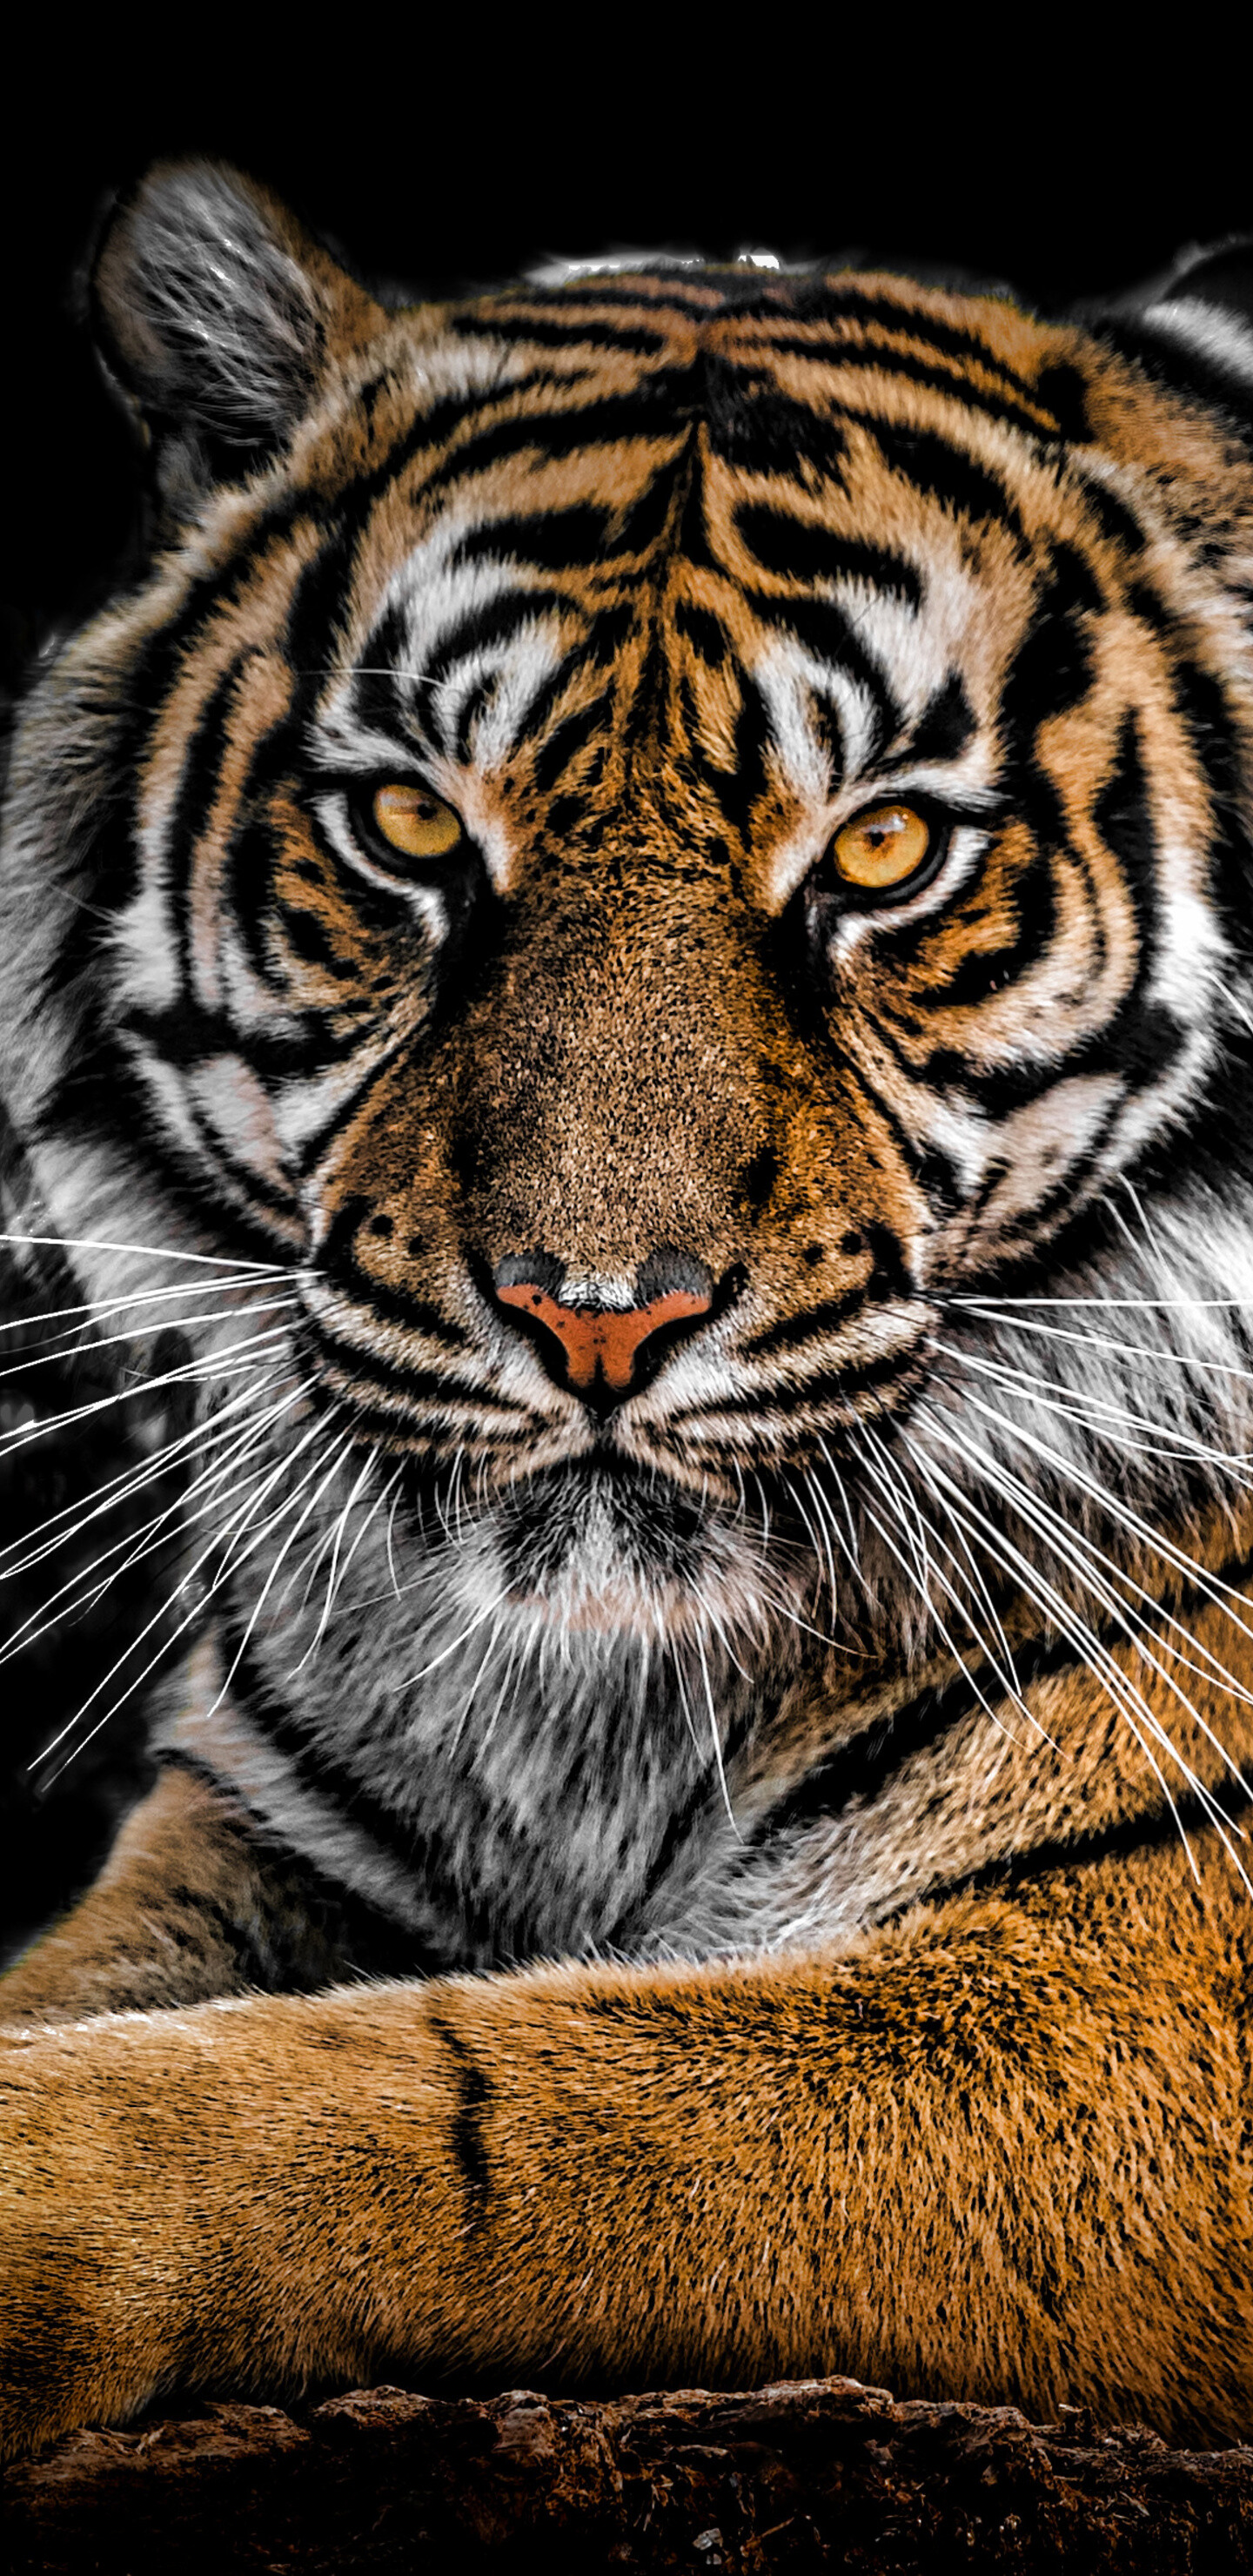 Tiger: Historically ranged from eastern Turkey and Transcaucasia to the coast of the Sea of Japan, and from South Asia across Southeast Asia to the Indonesian islands of Sumatra, Java, and Bali. 1440x2960 HD Wallpaper.